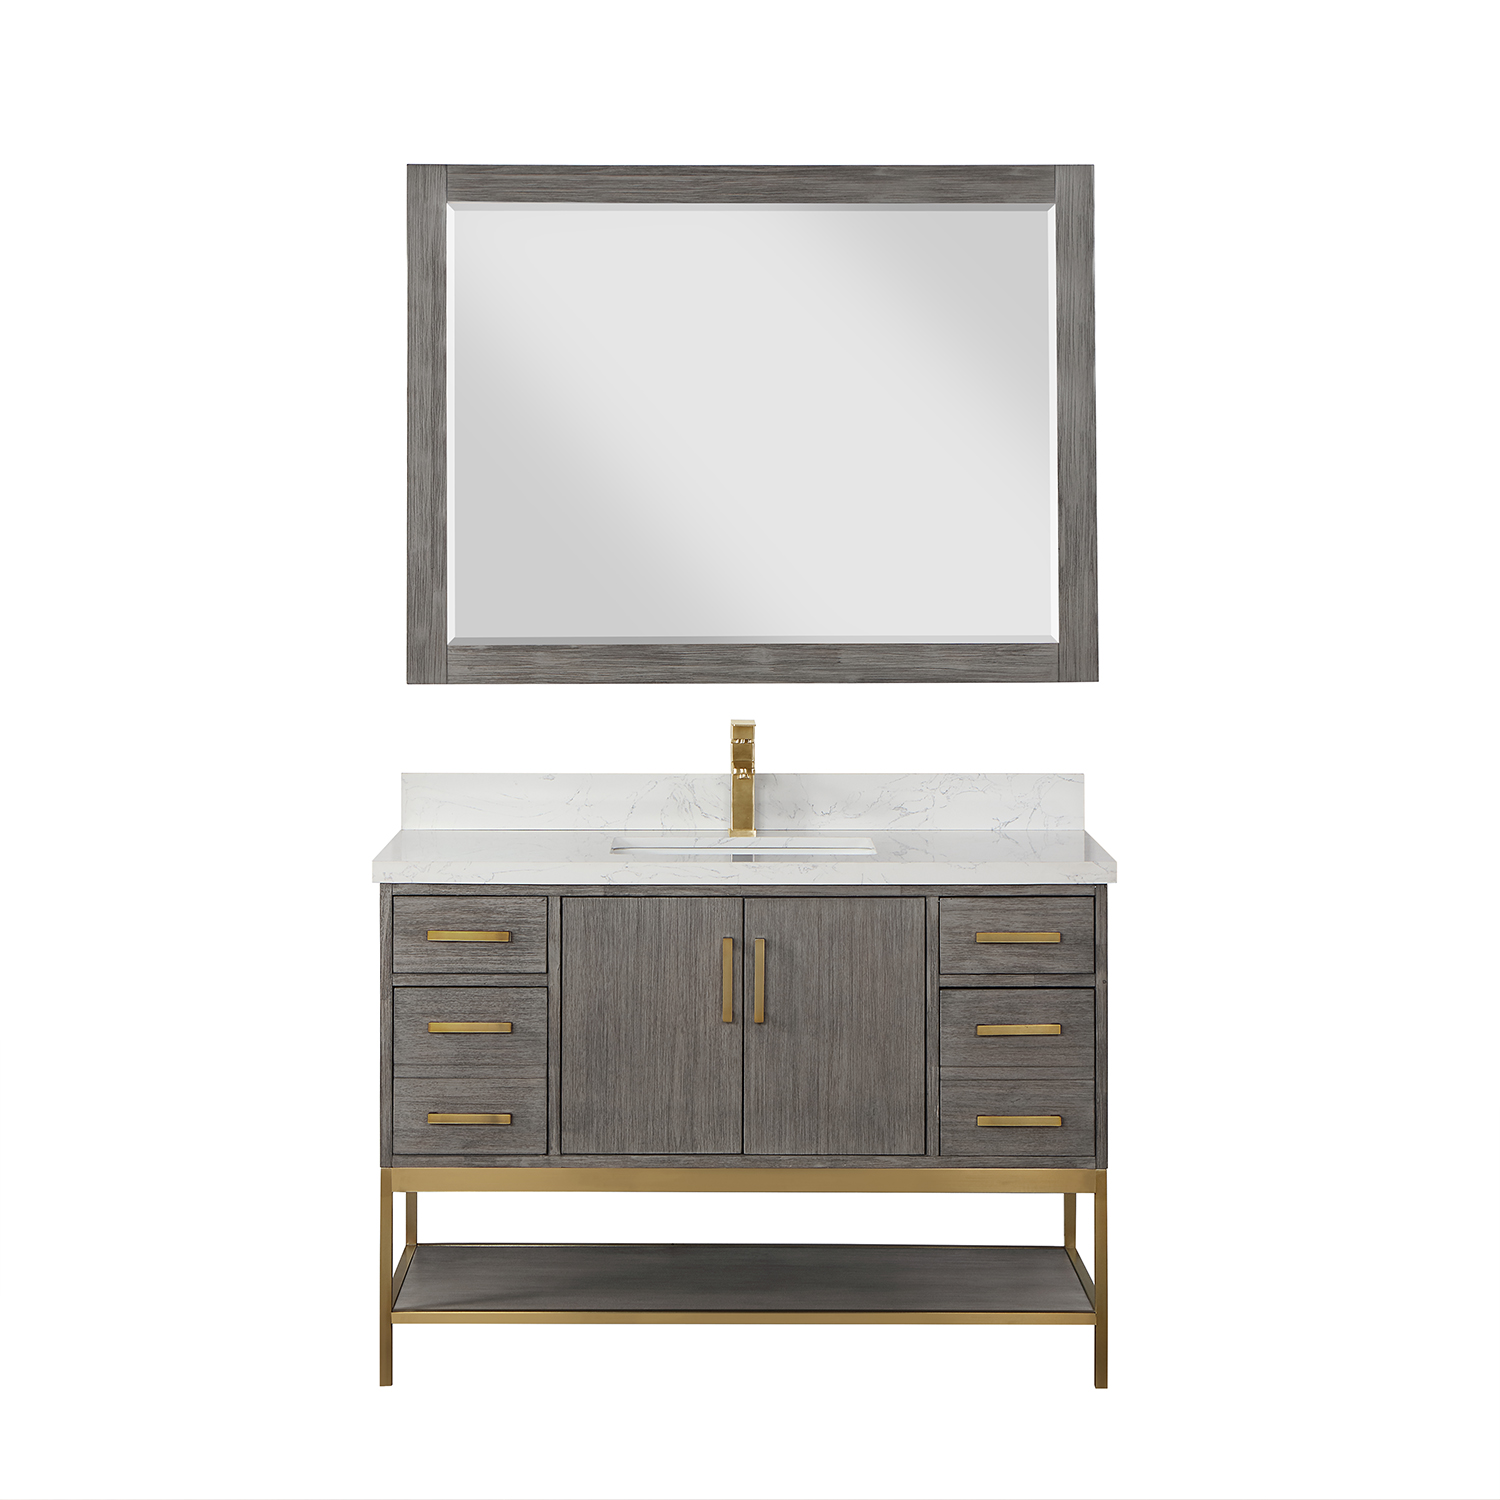 Issac Edwards Collection 48" Single Bathroom Vanity Set in Classical Grey with Grain White Composite Stone Countertop without Mirror 